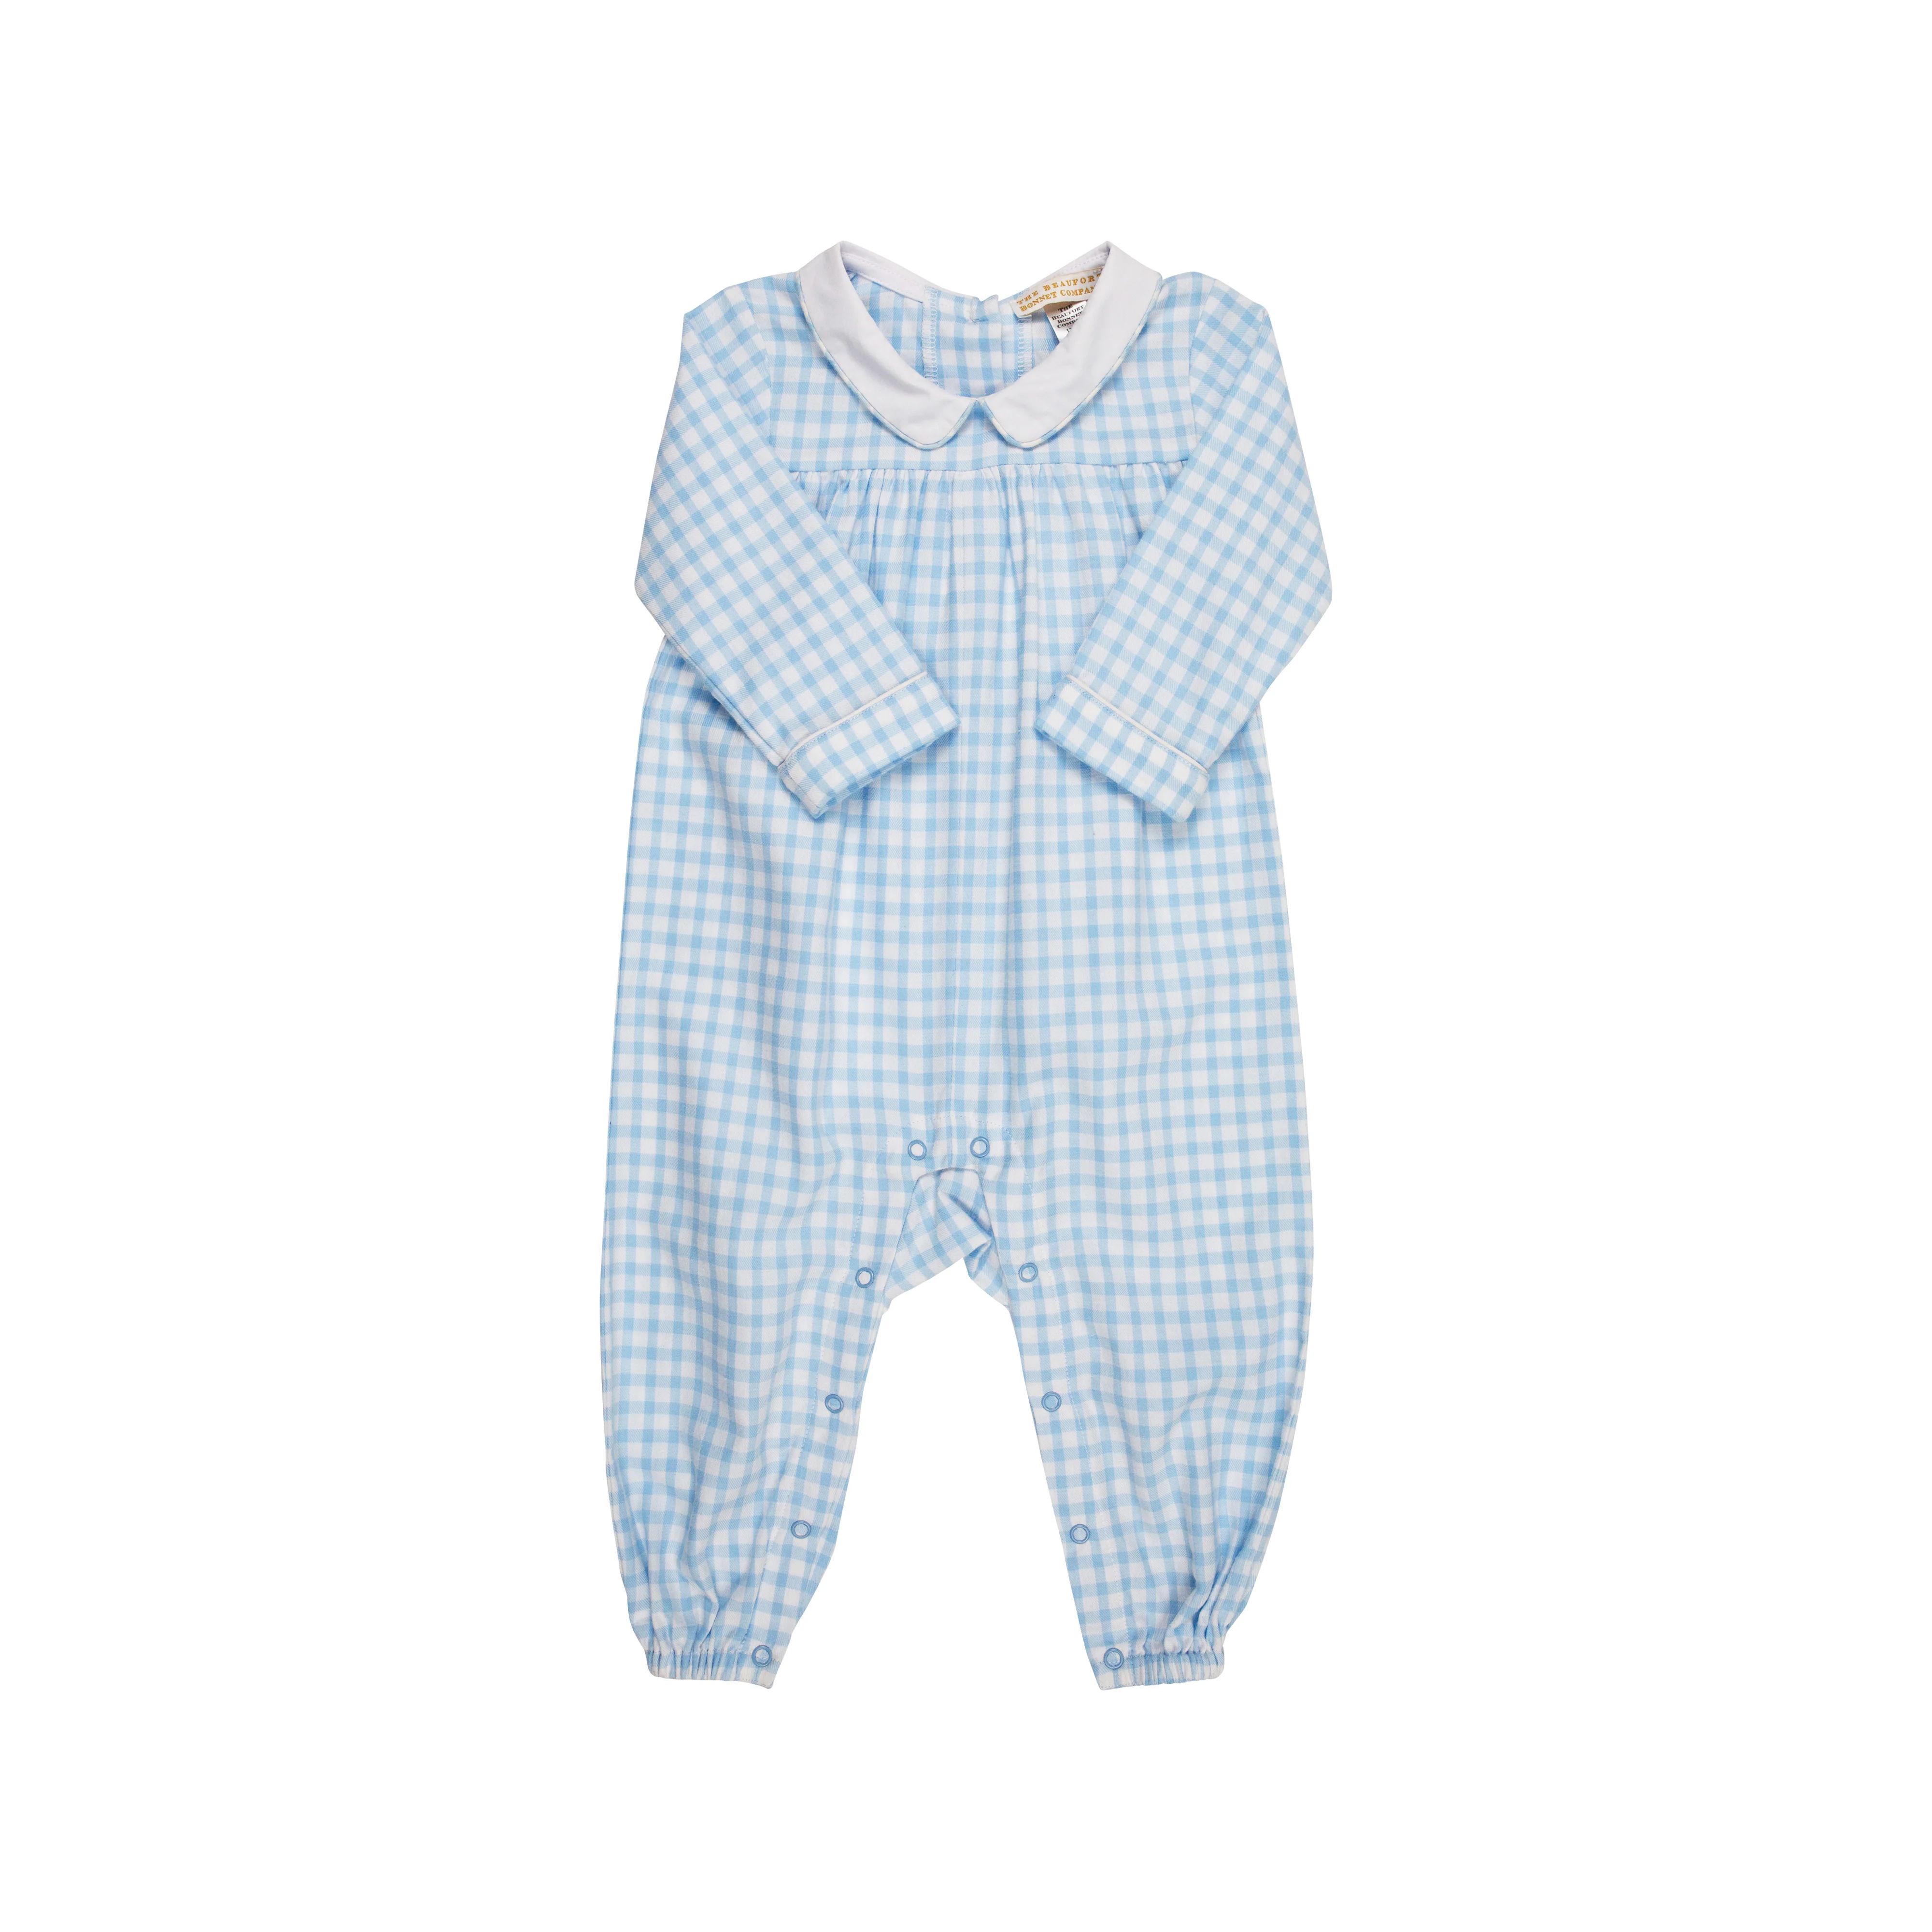 Price Playsuit - Blue Chastain Check with Worth Avenue White | The Beaufort Bonnet Company